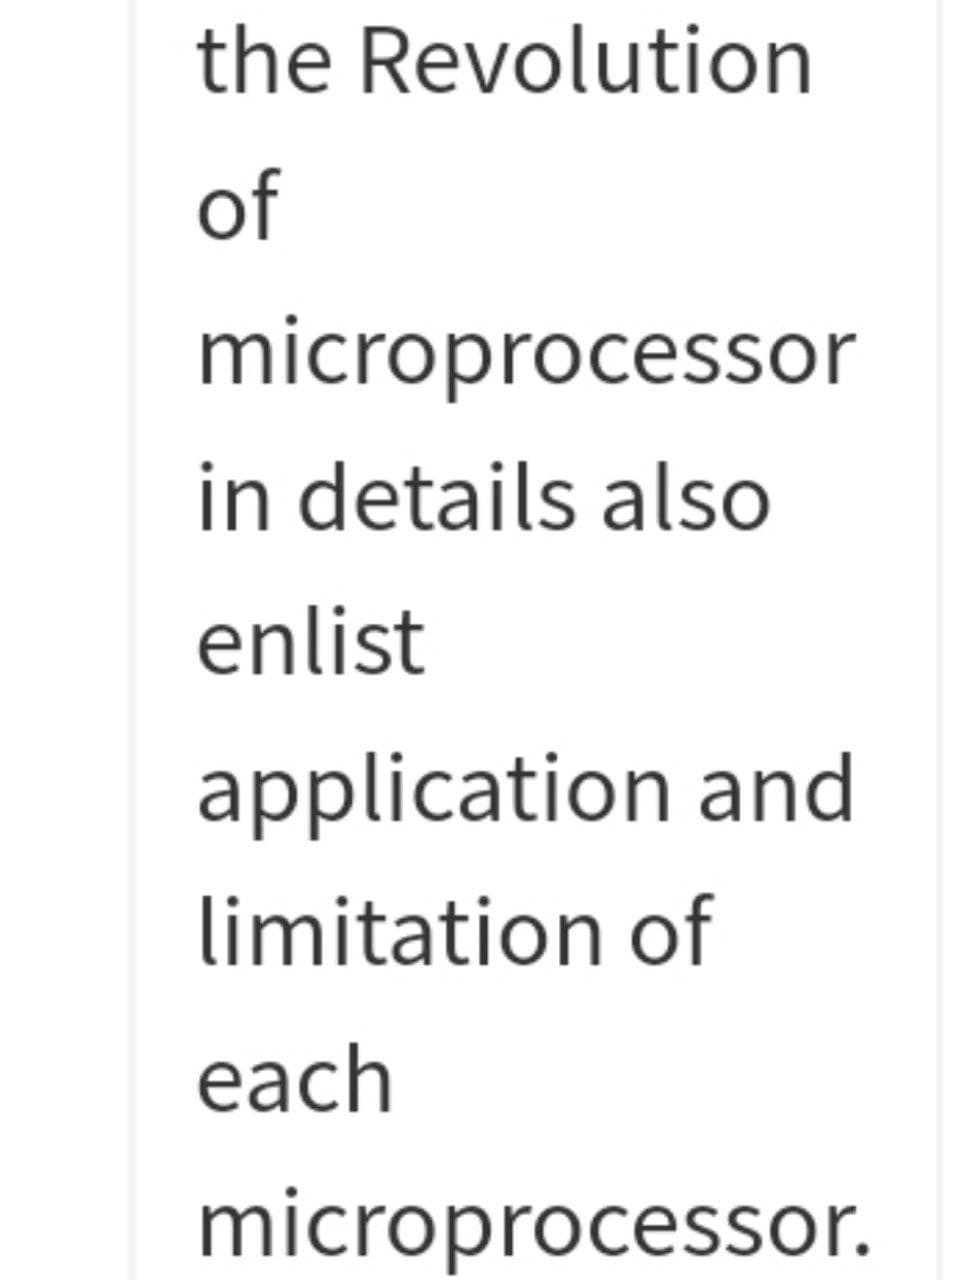 the Revolution
of
microprocessor
in details also
enlist
application and
limitation of
each
microprocessor.
